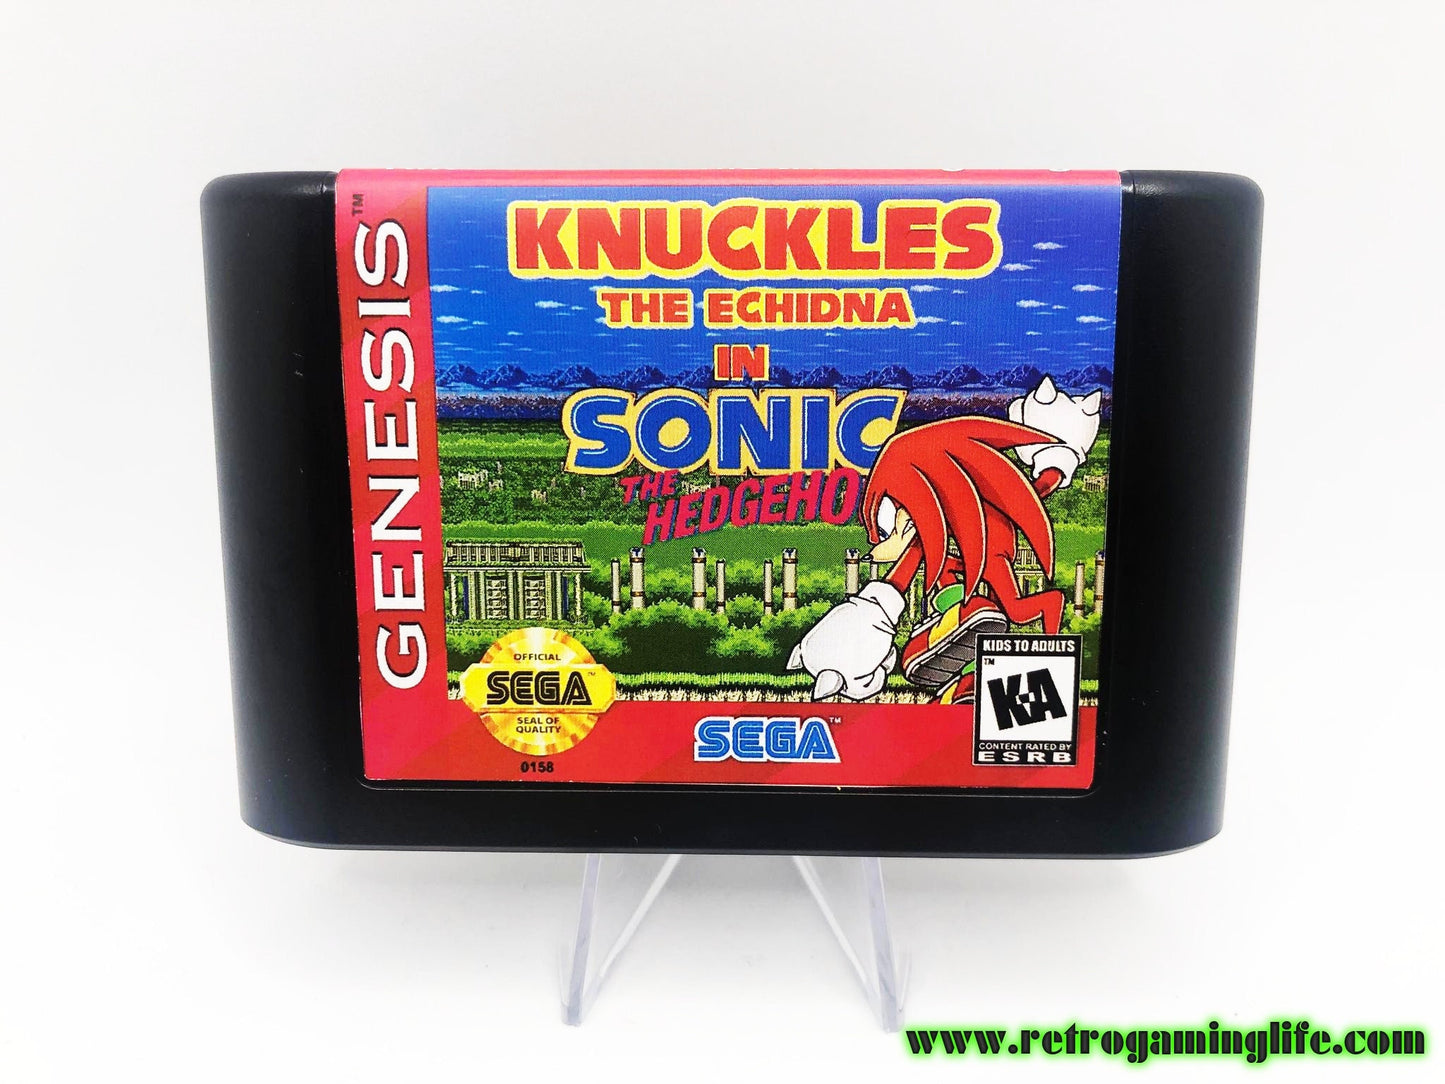 Knuckles the Echidna in Sonic the Hedgehog Sega Genesis Game Cart Repro